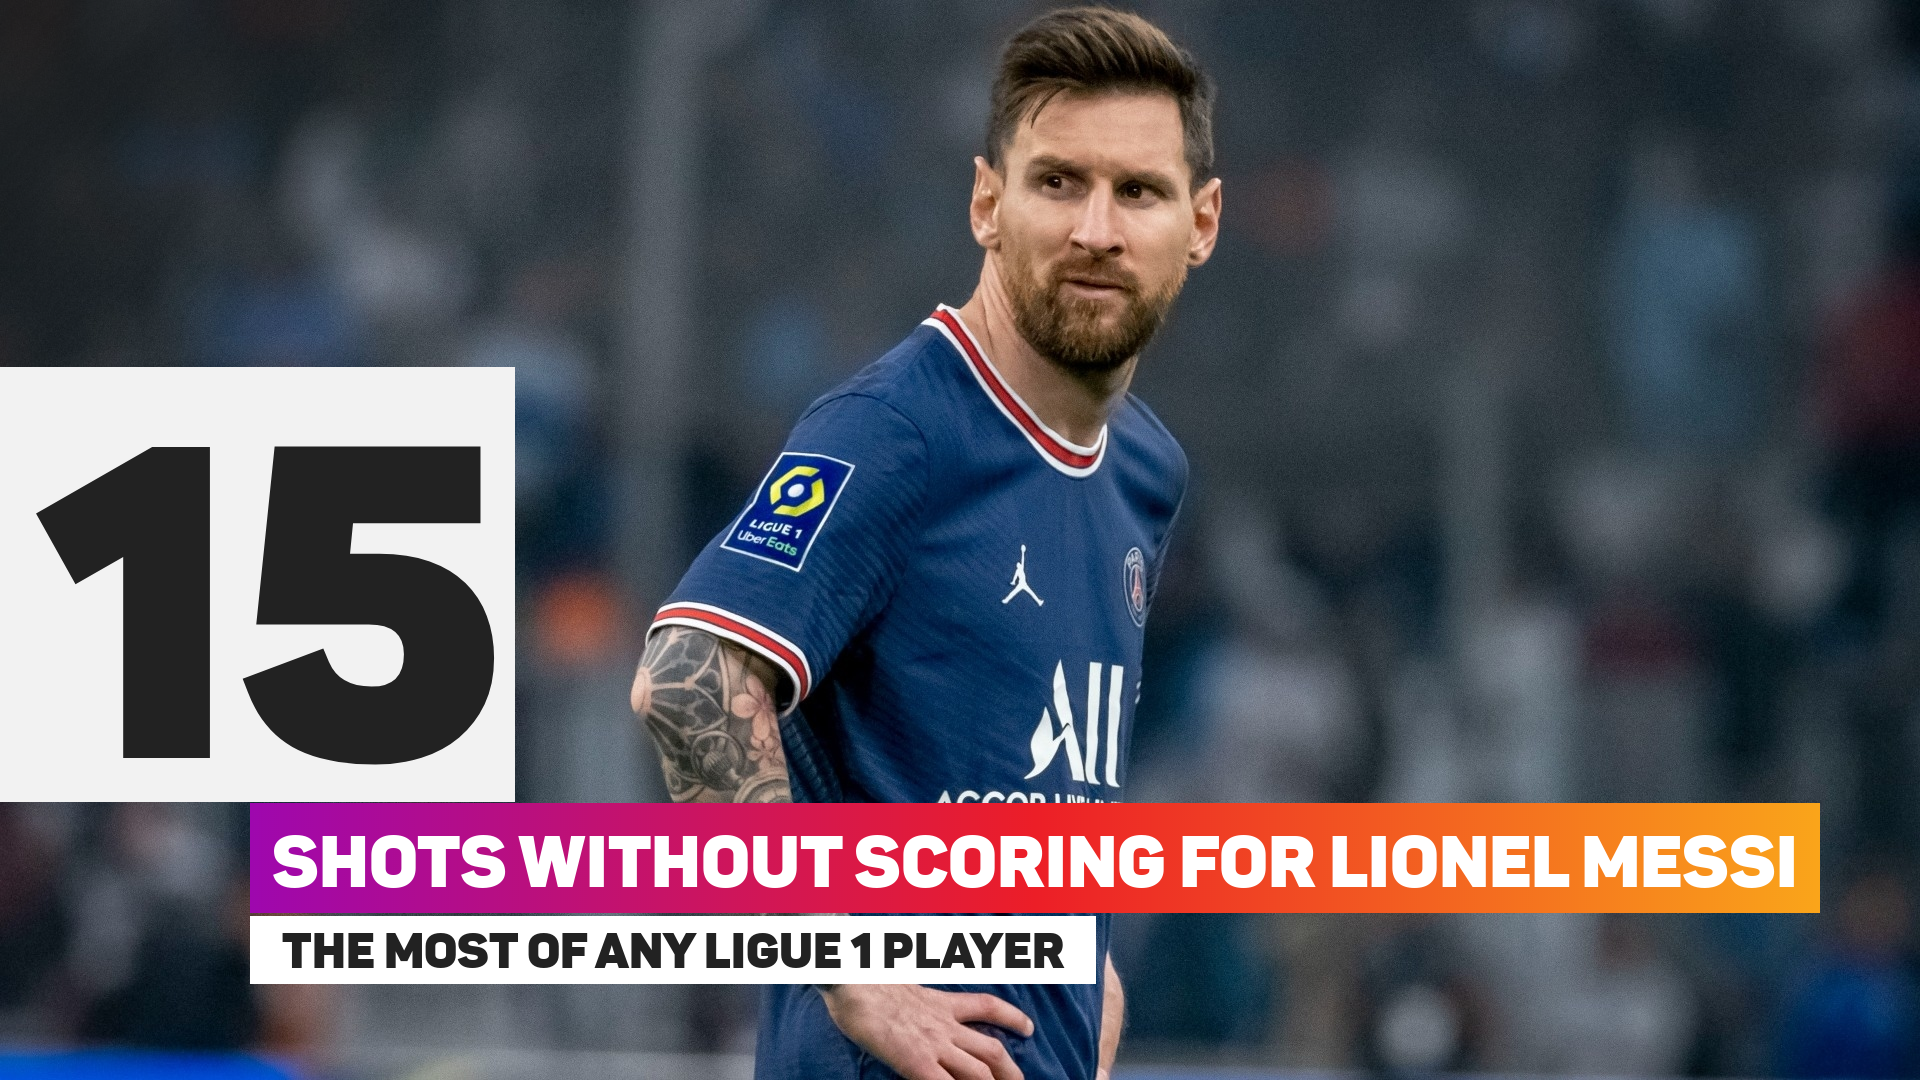 Lionel Messi has had 15 shots without scoring in Ligue 1